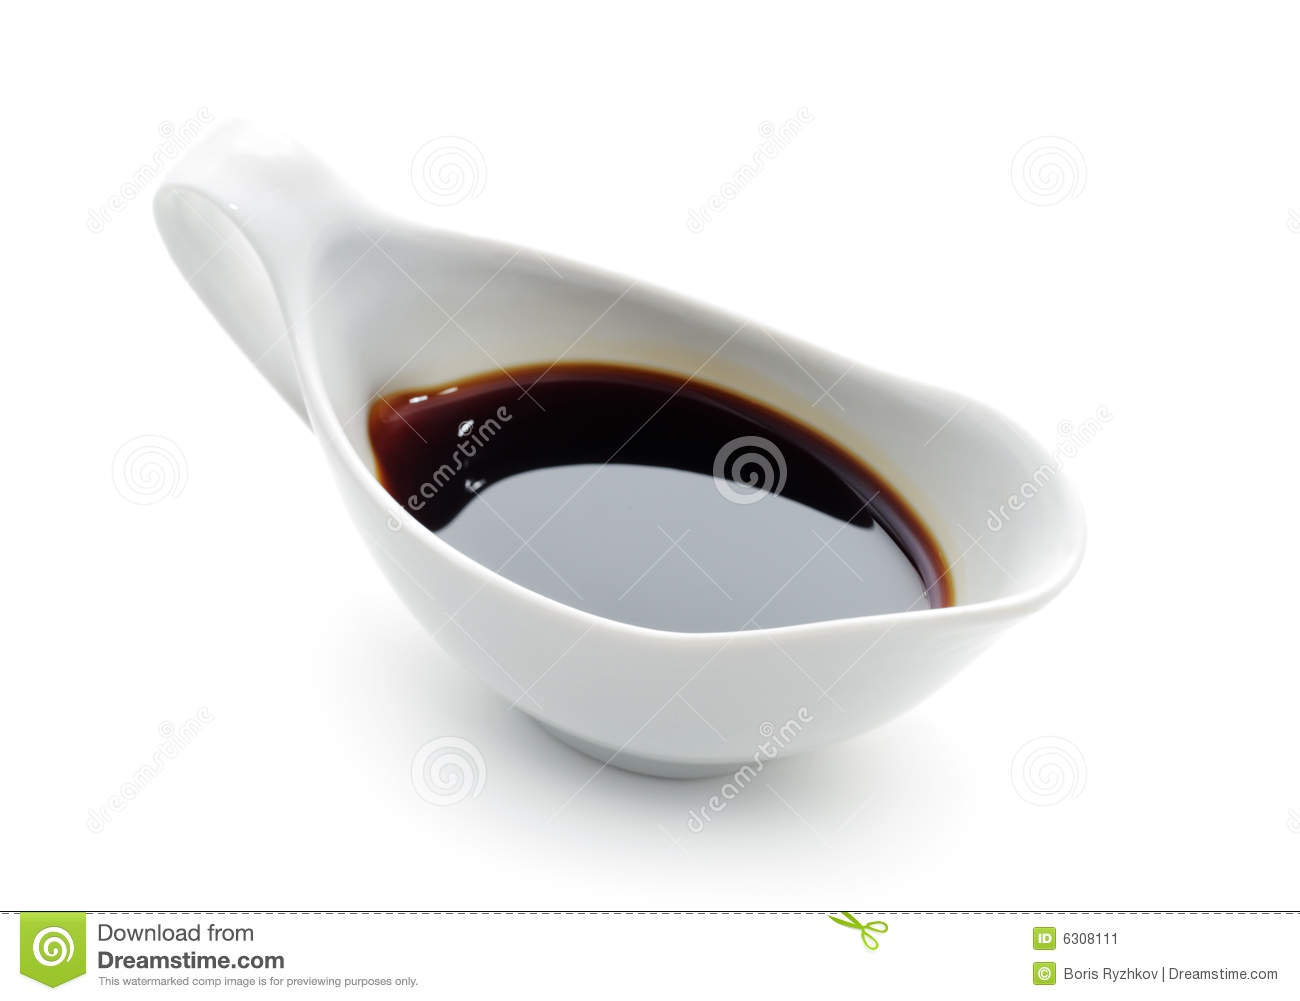 Soy Sauce Stock Image   Image  6308111